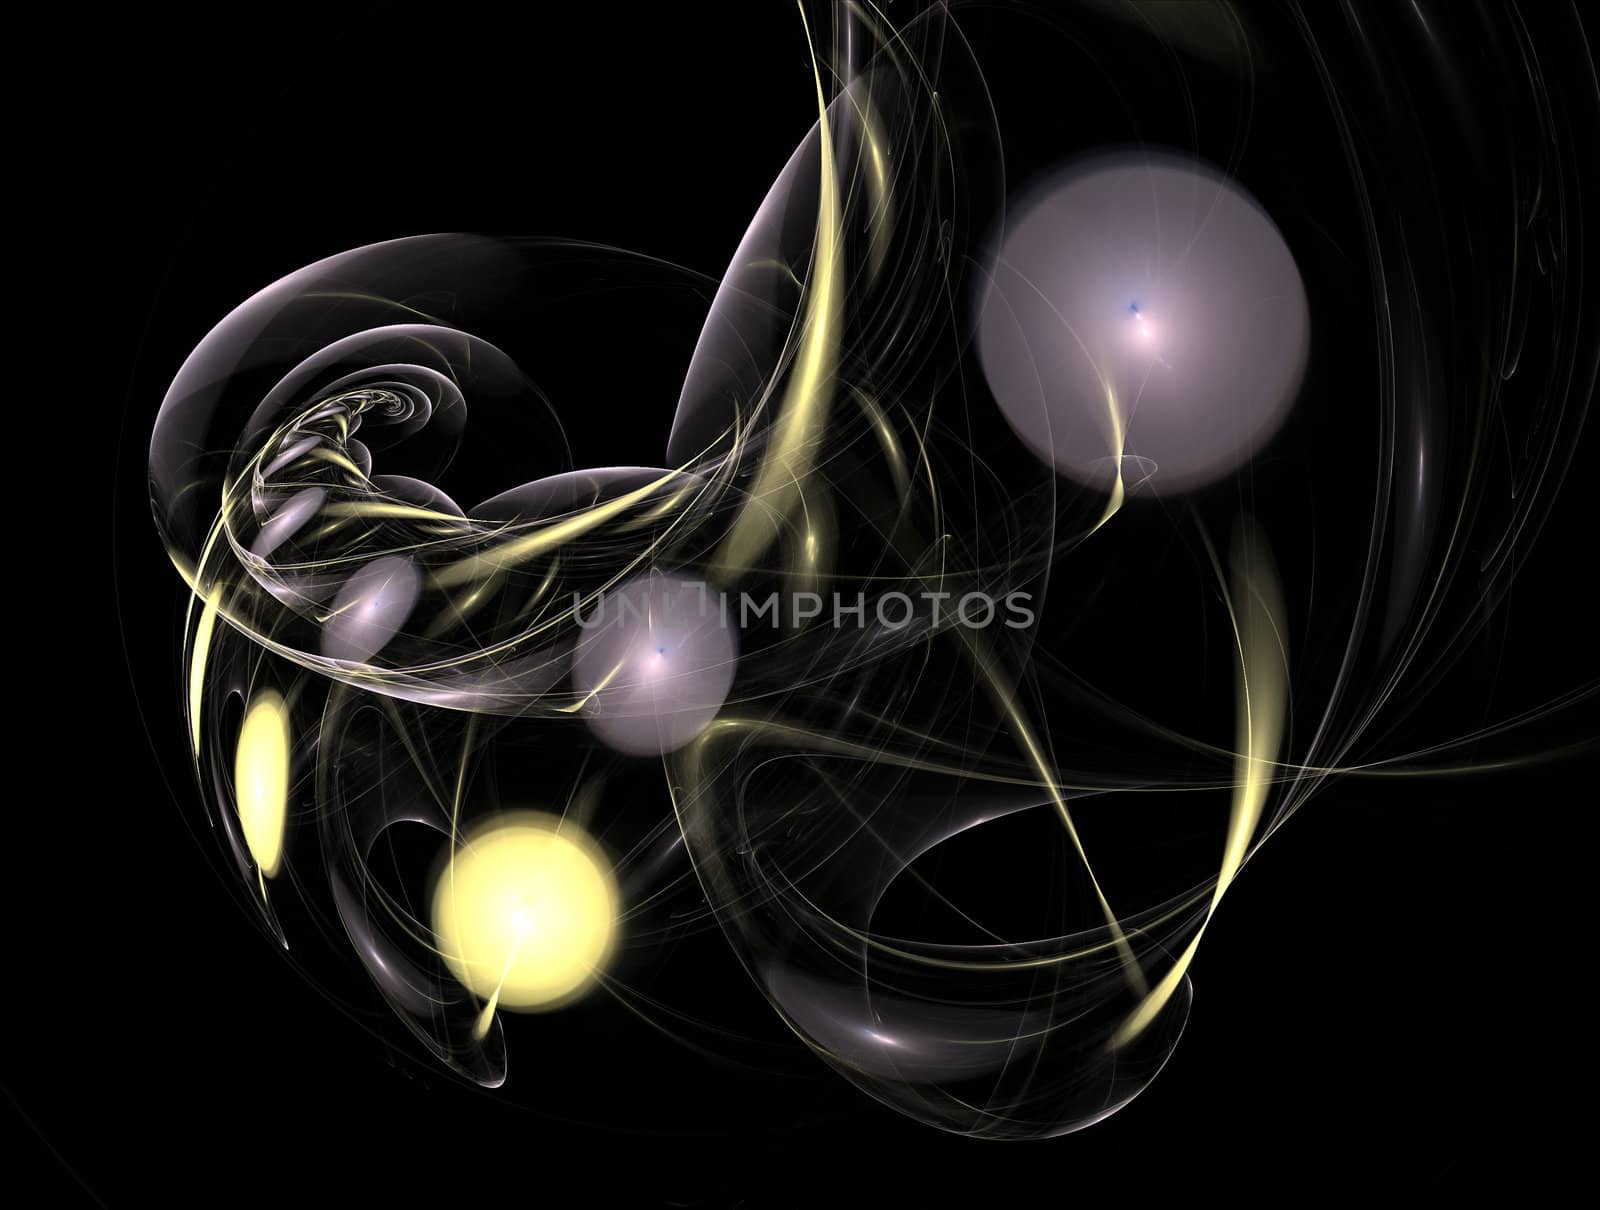 Spheres and Wave Fractal by watamyr